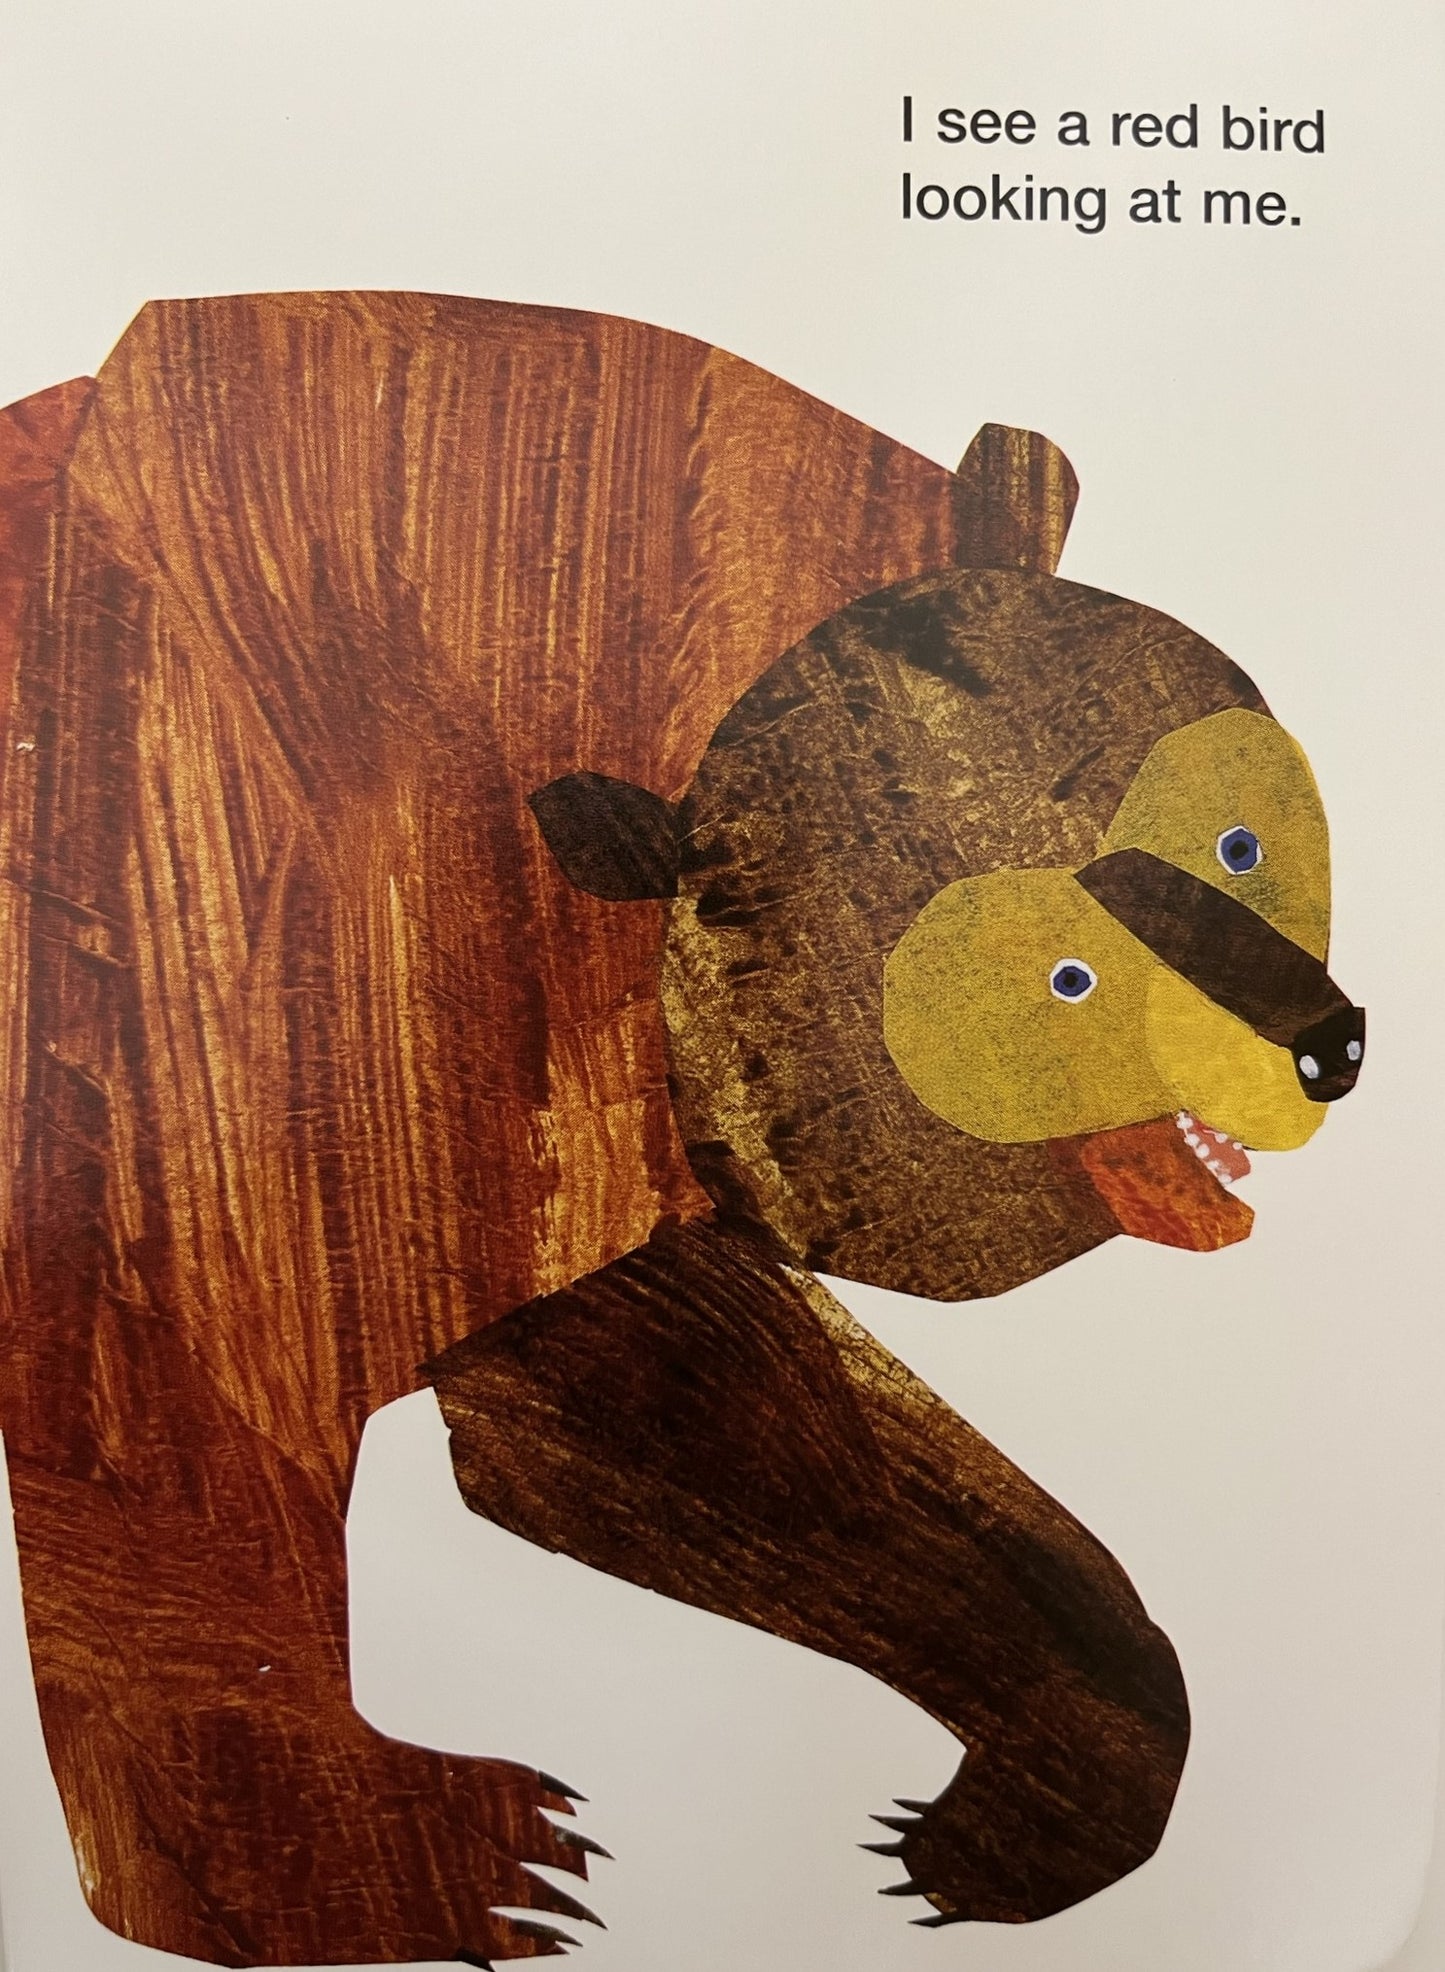 Brown Bear, Brown Bear, What Do You See? - MakoStars Online Store